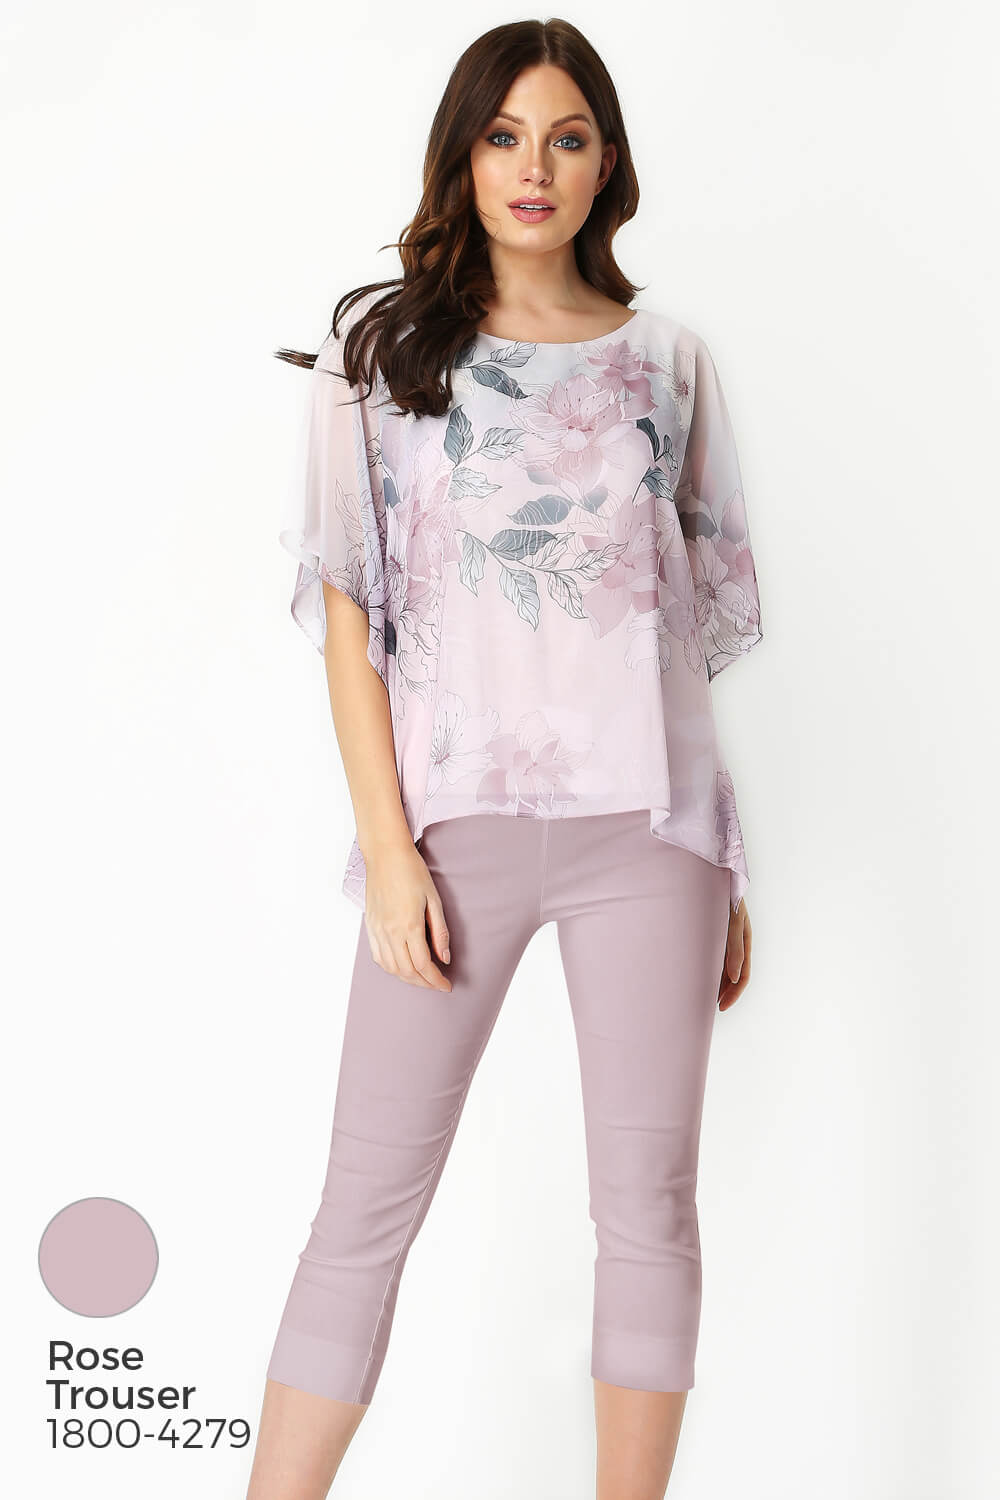 PINK Floral Chiffon Overlay Top, Image 7 of 8